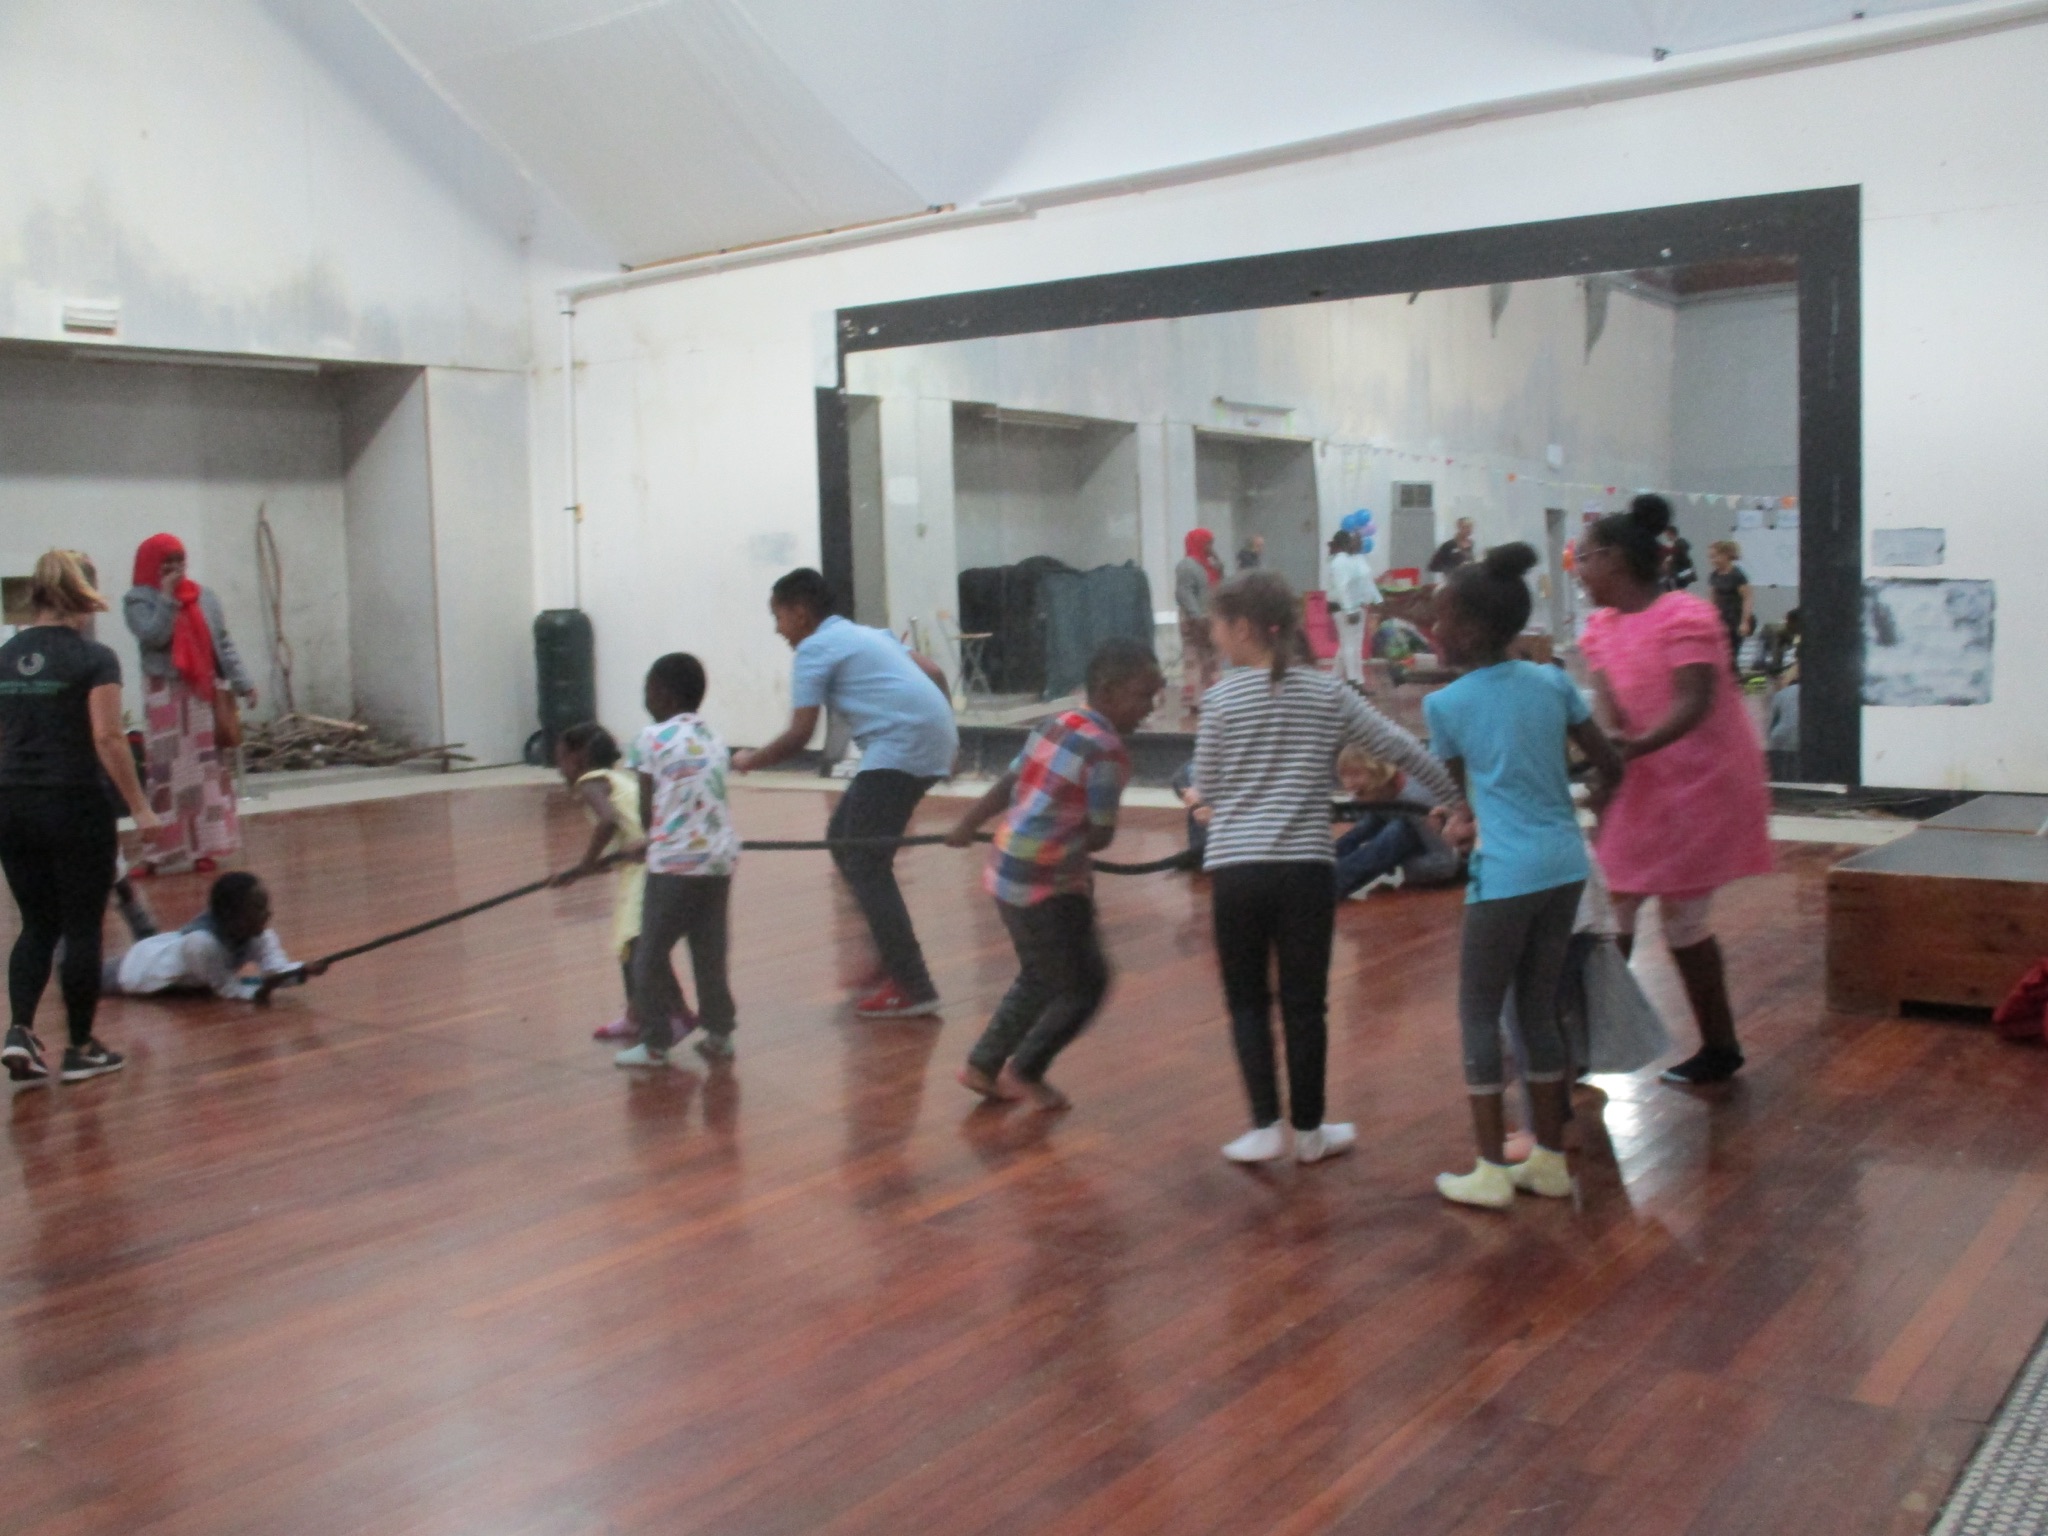 Children doing a tug of war in the dance hall